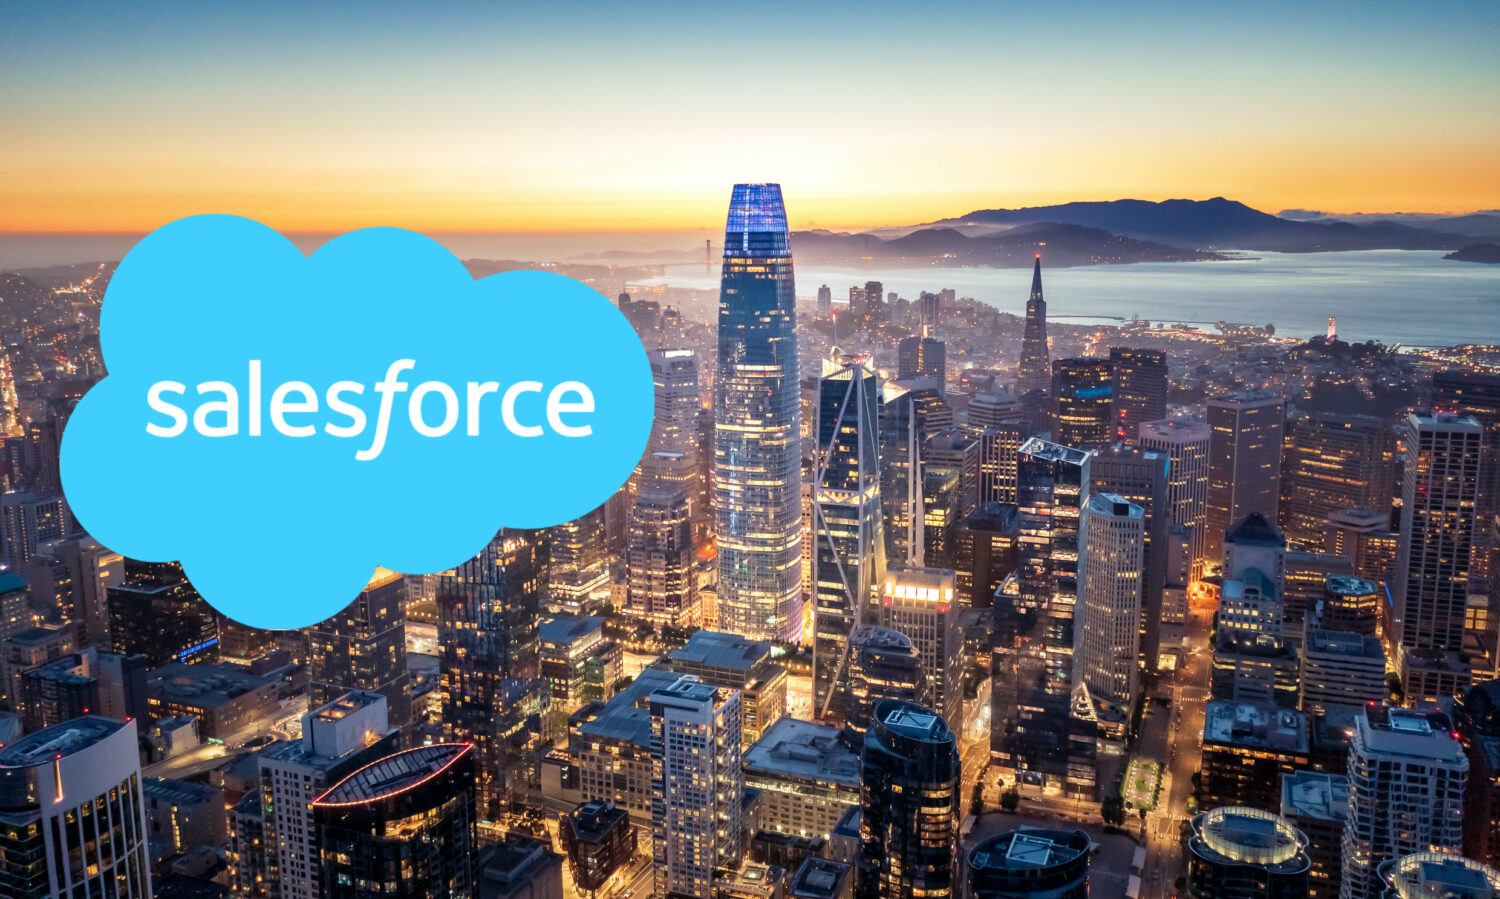 25 years of Salesforce; from a 1-bedroom apartment to world domination